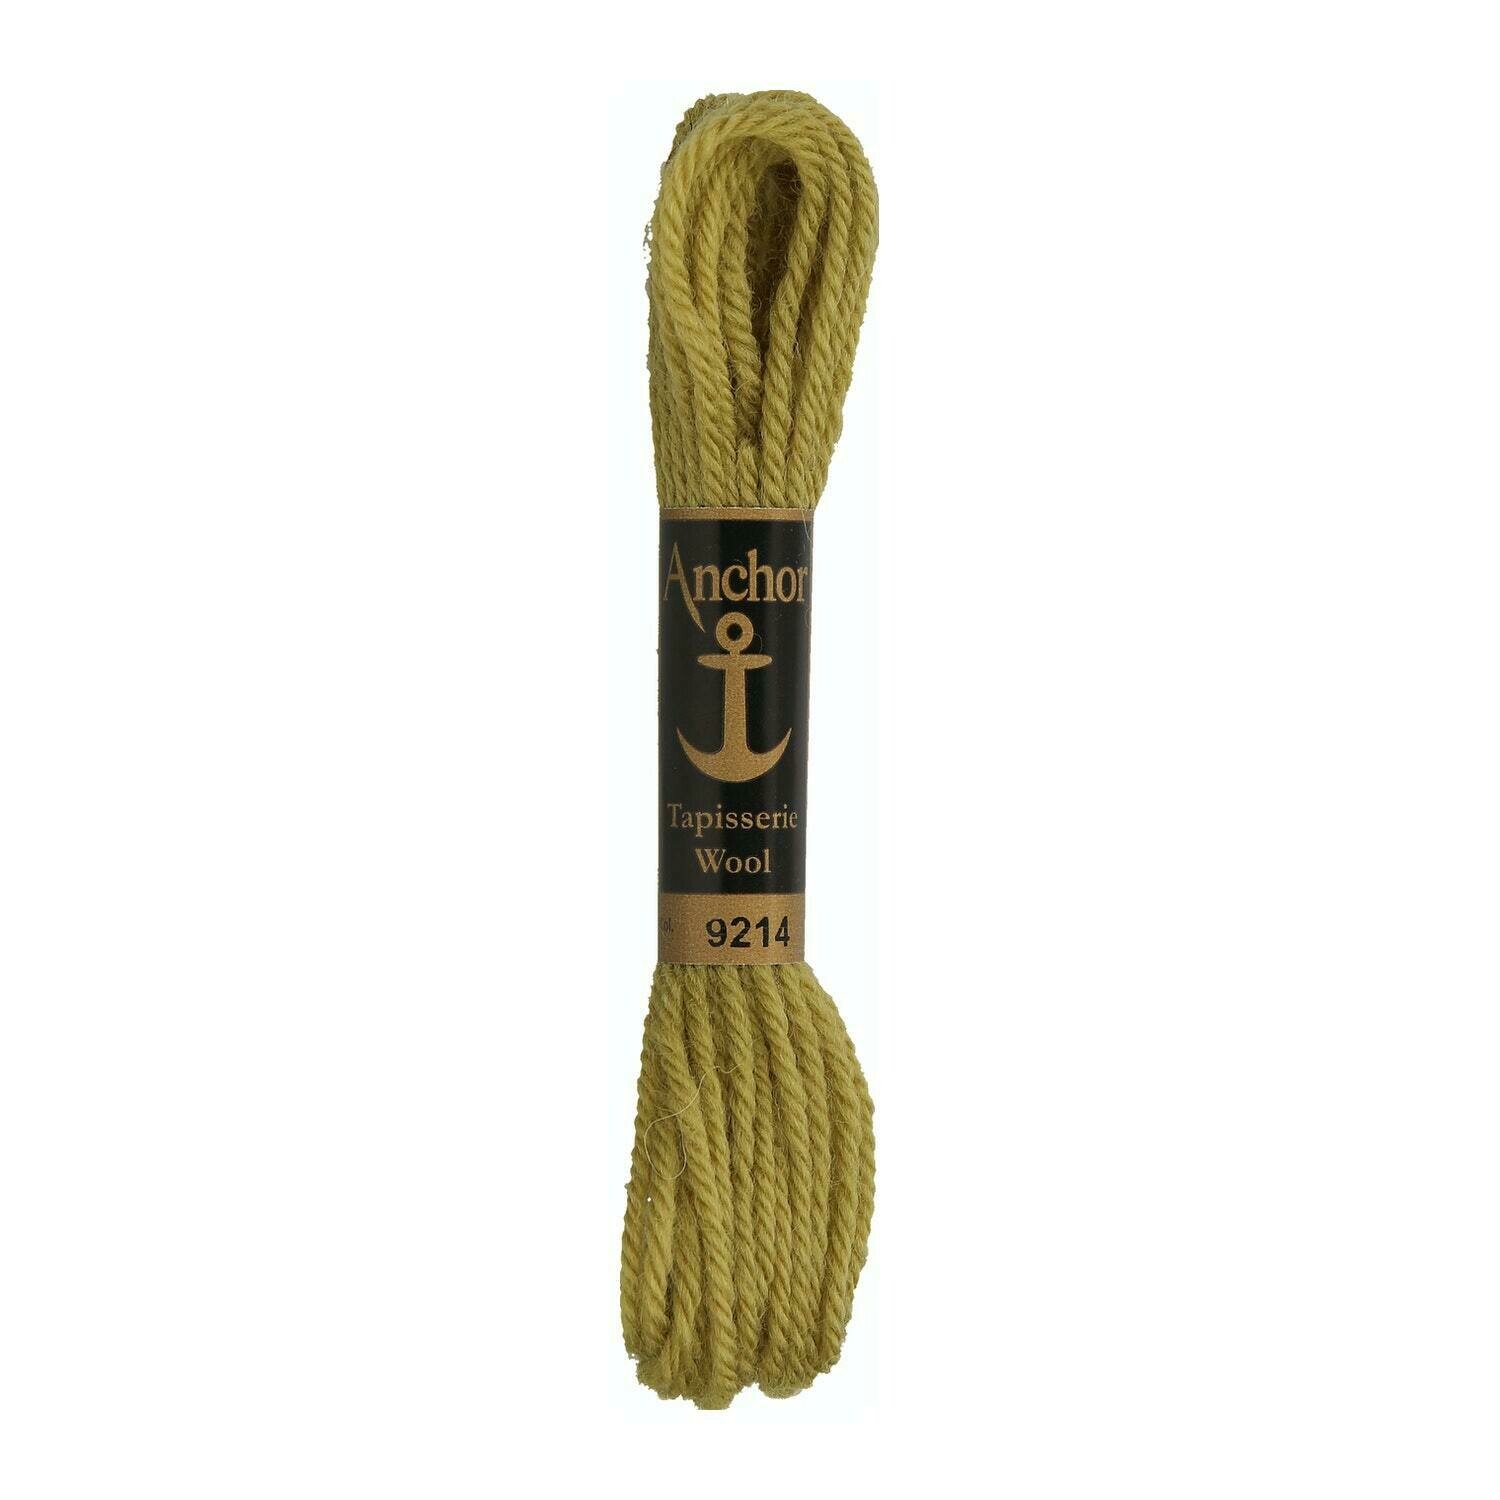 Anchor Tapisserie Wool #09214